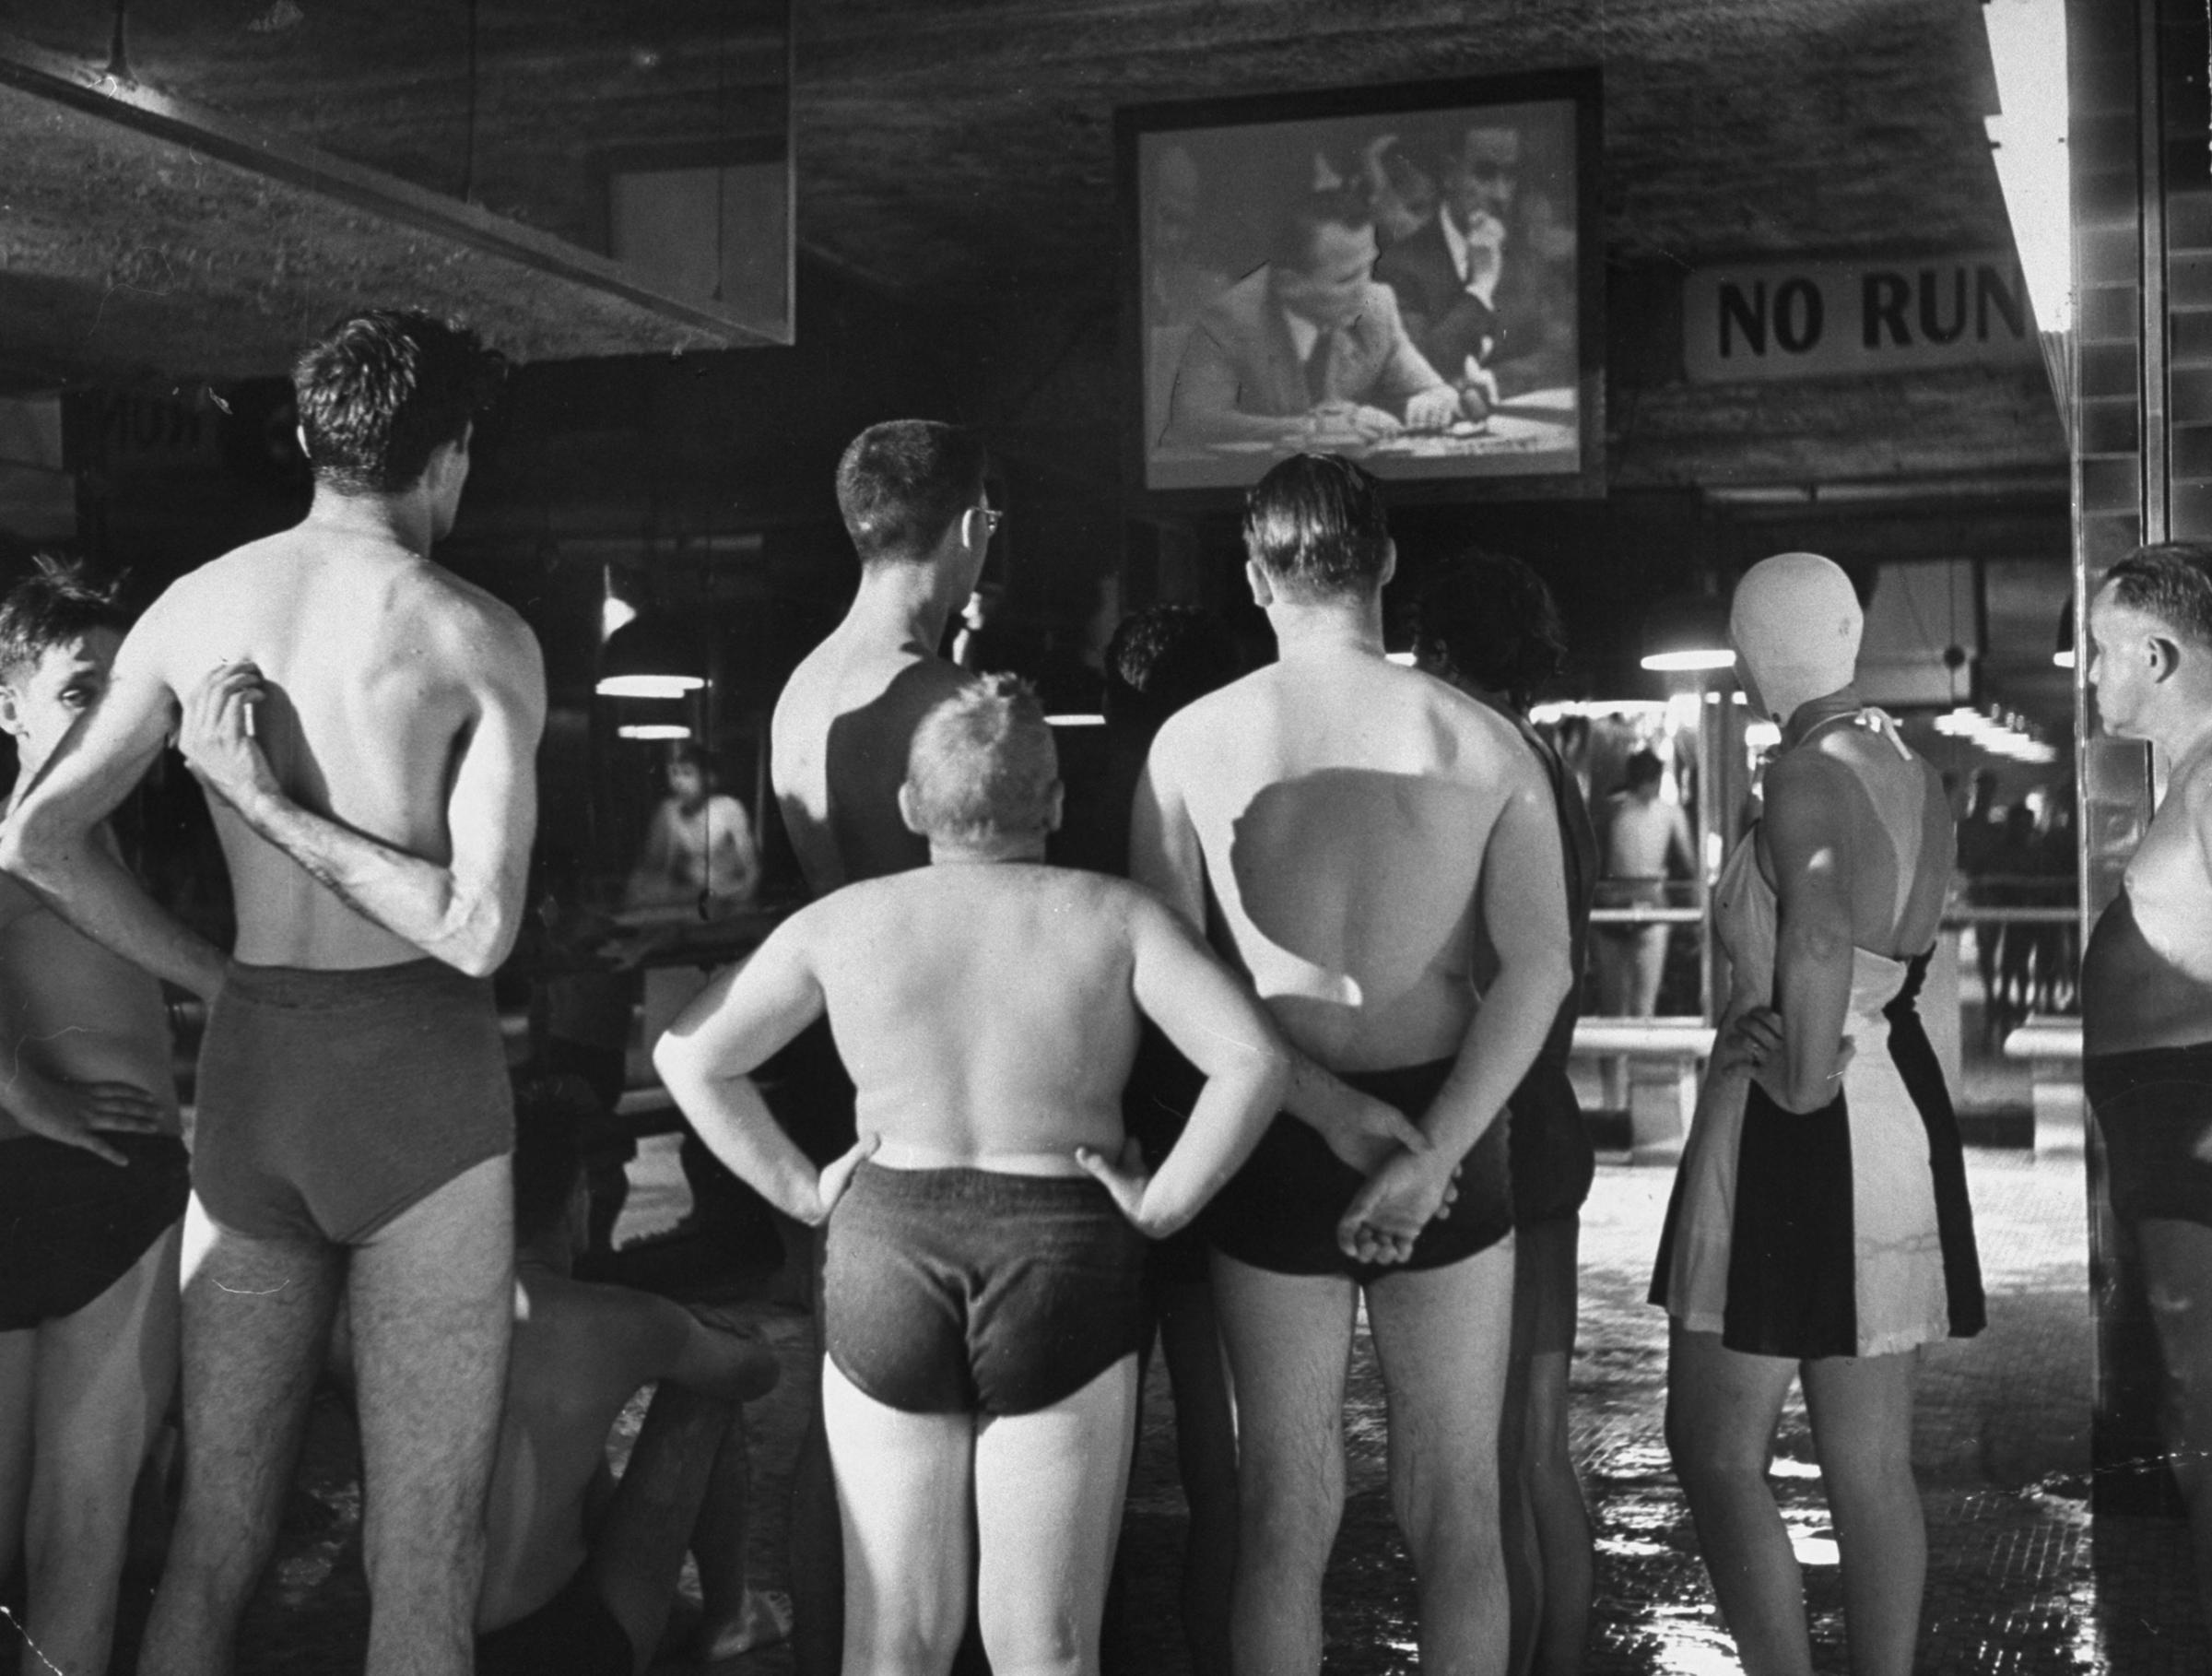 A group of swimmers at an indoor pool watch the Russian ambassador to the United Nations, Jacob Malik, filibustering in the UN Security Council in 1950.